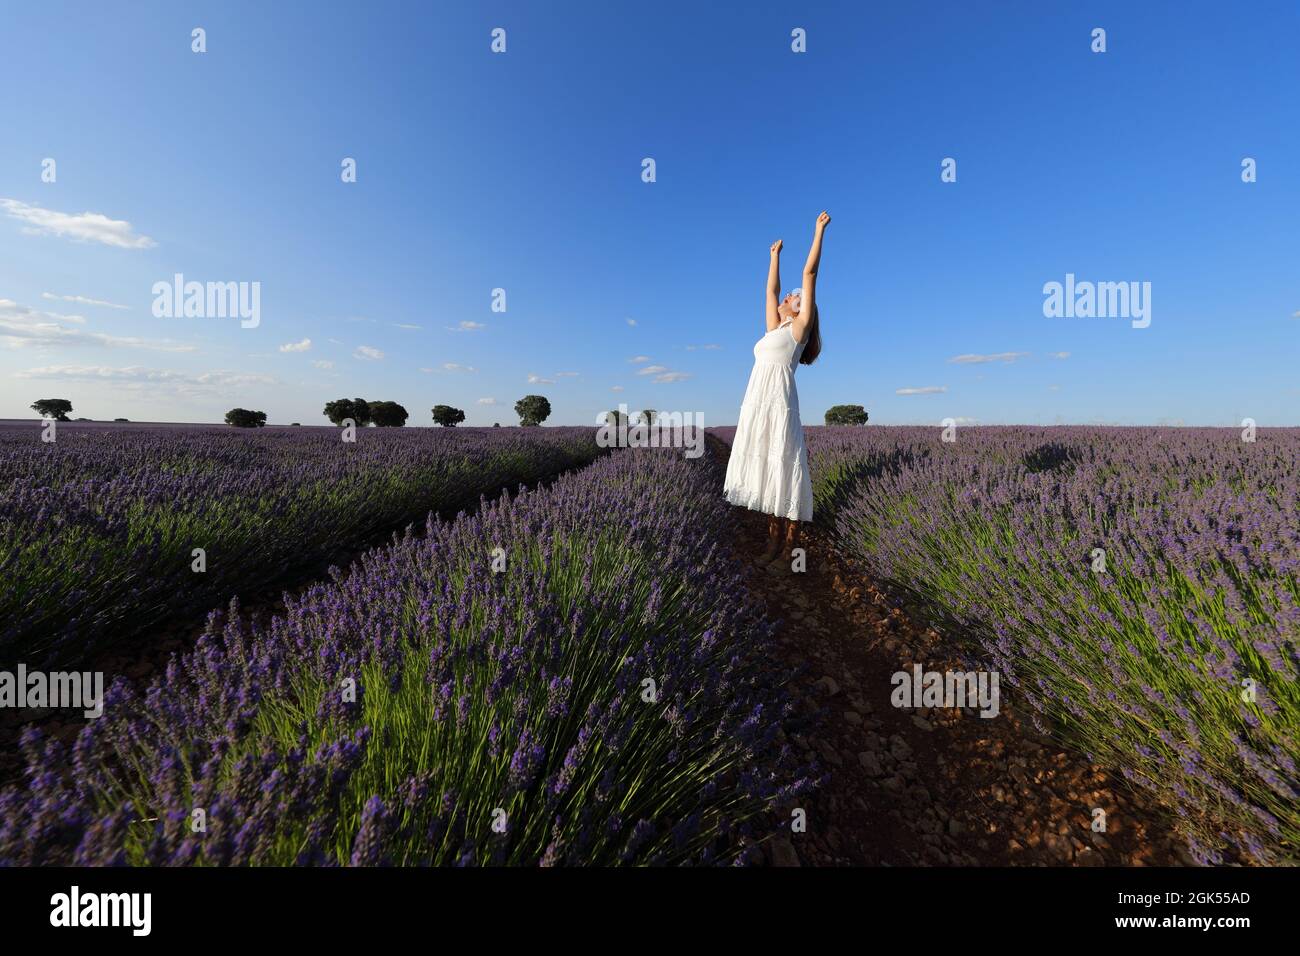 Excited woman wearing white dress raising arms in a lavender field Stock Photo